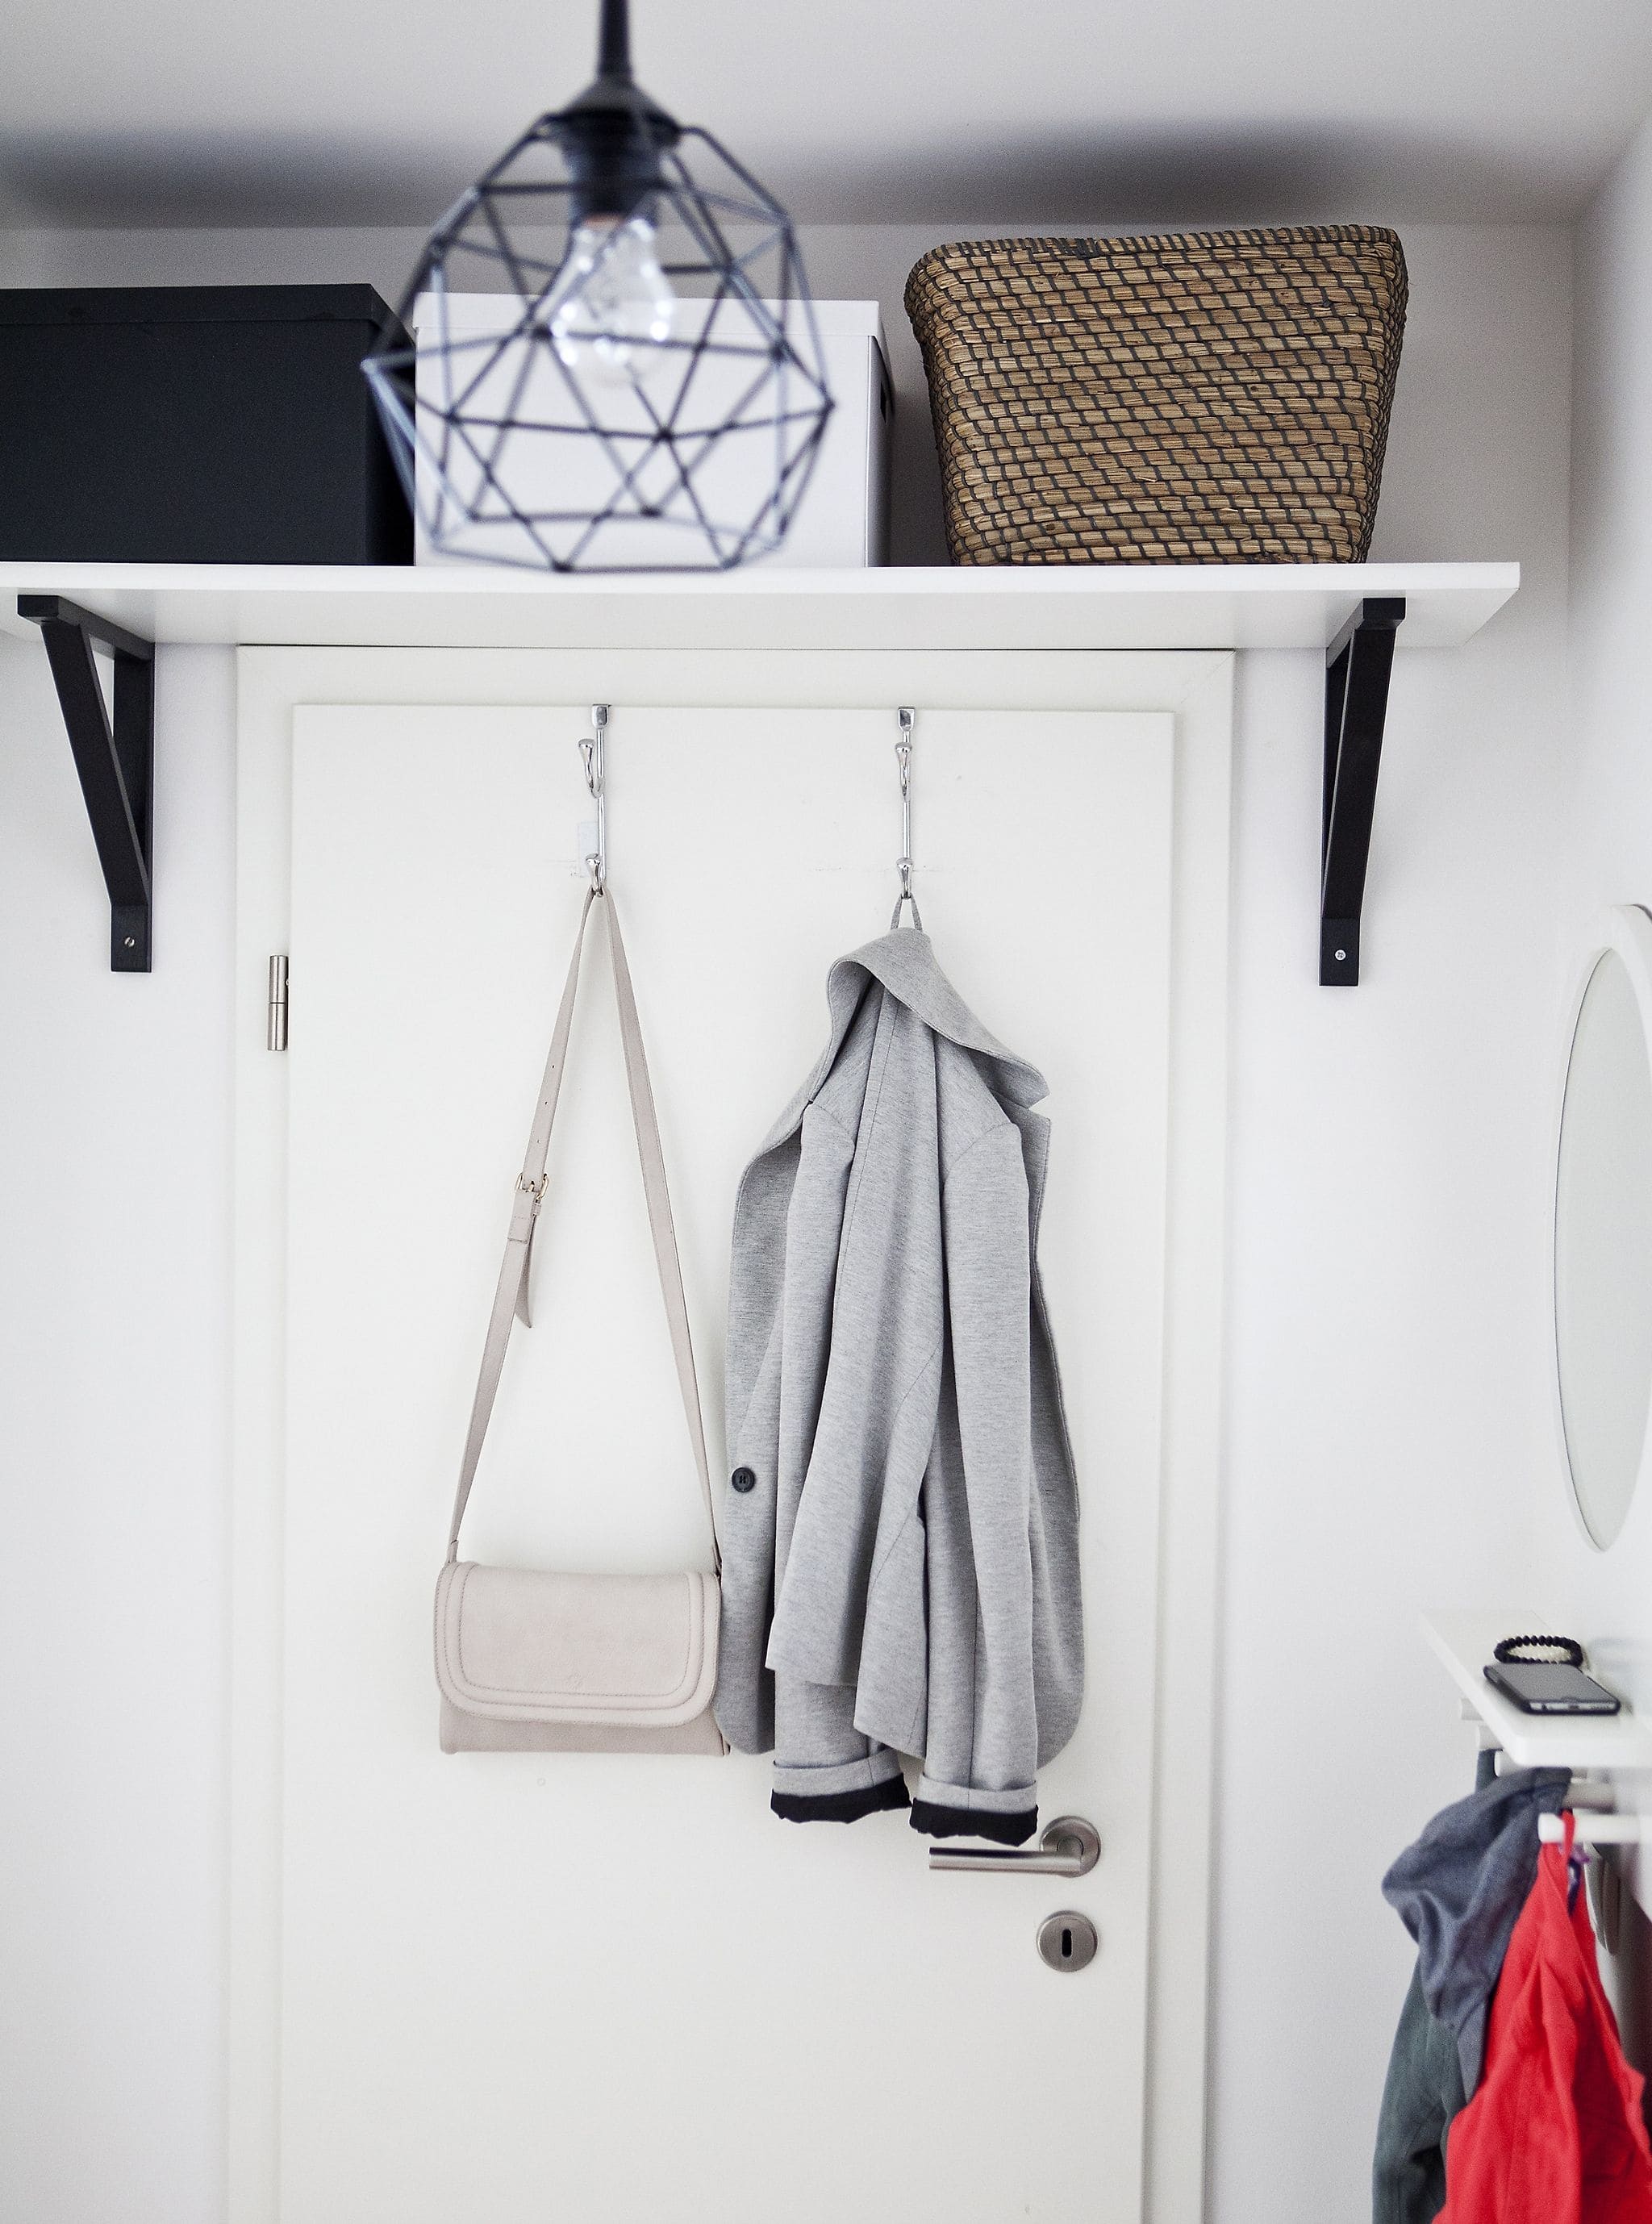 20 fascinating over the door storage ideas to put in your bag - 157